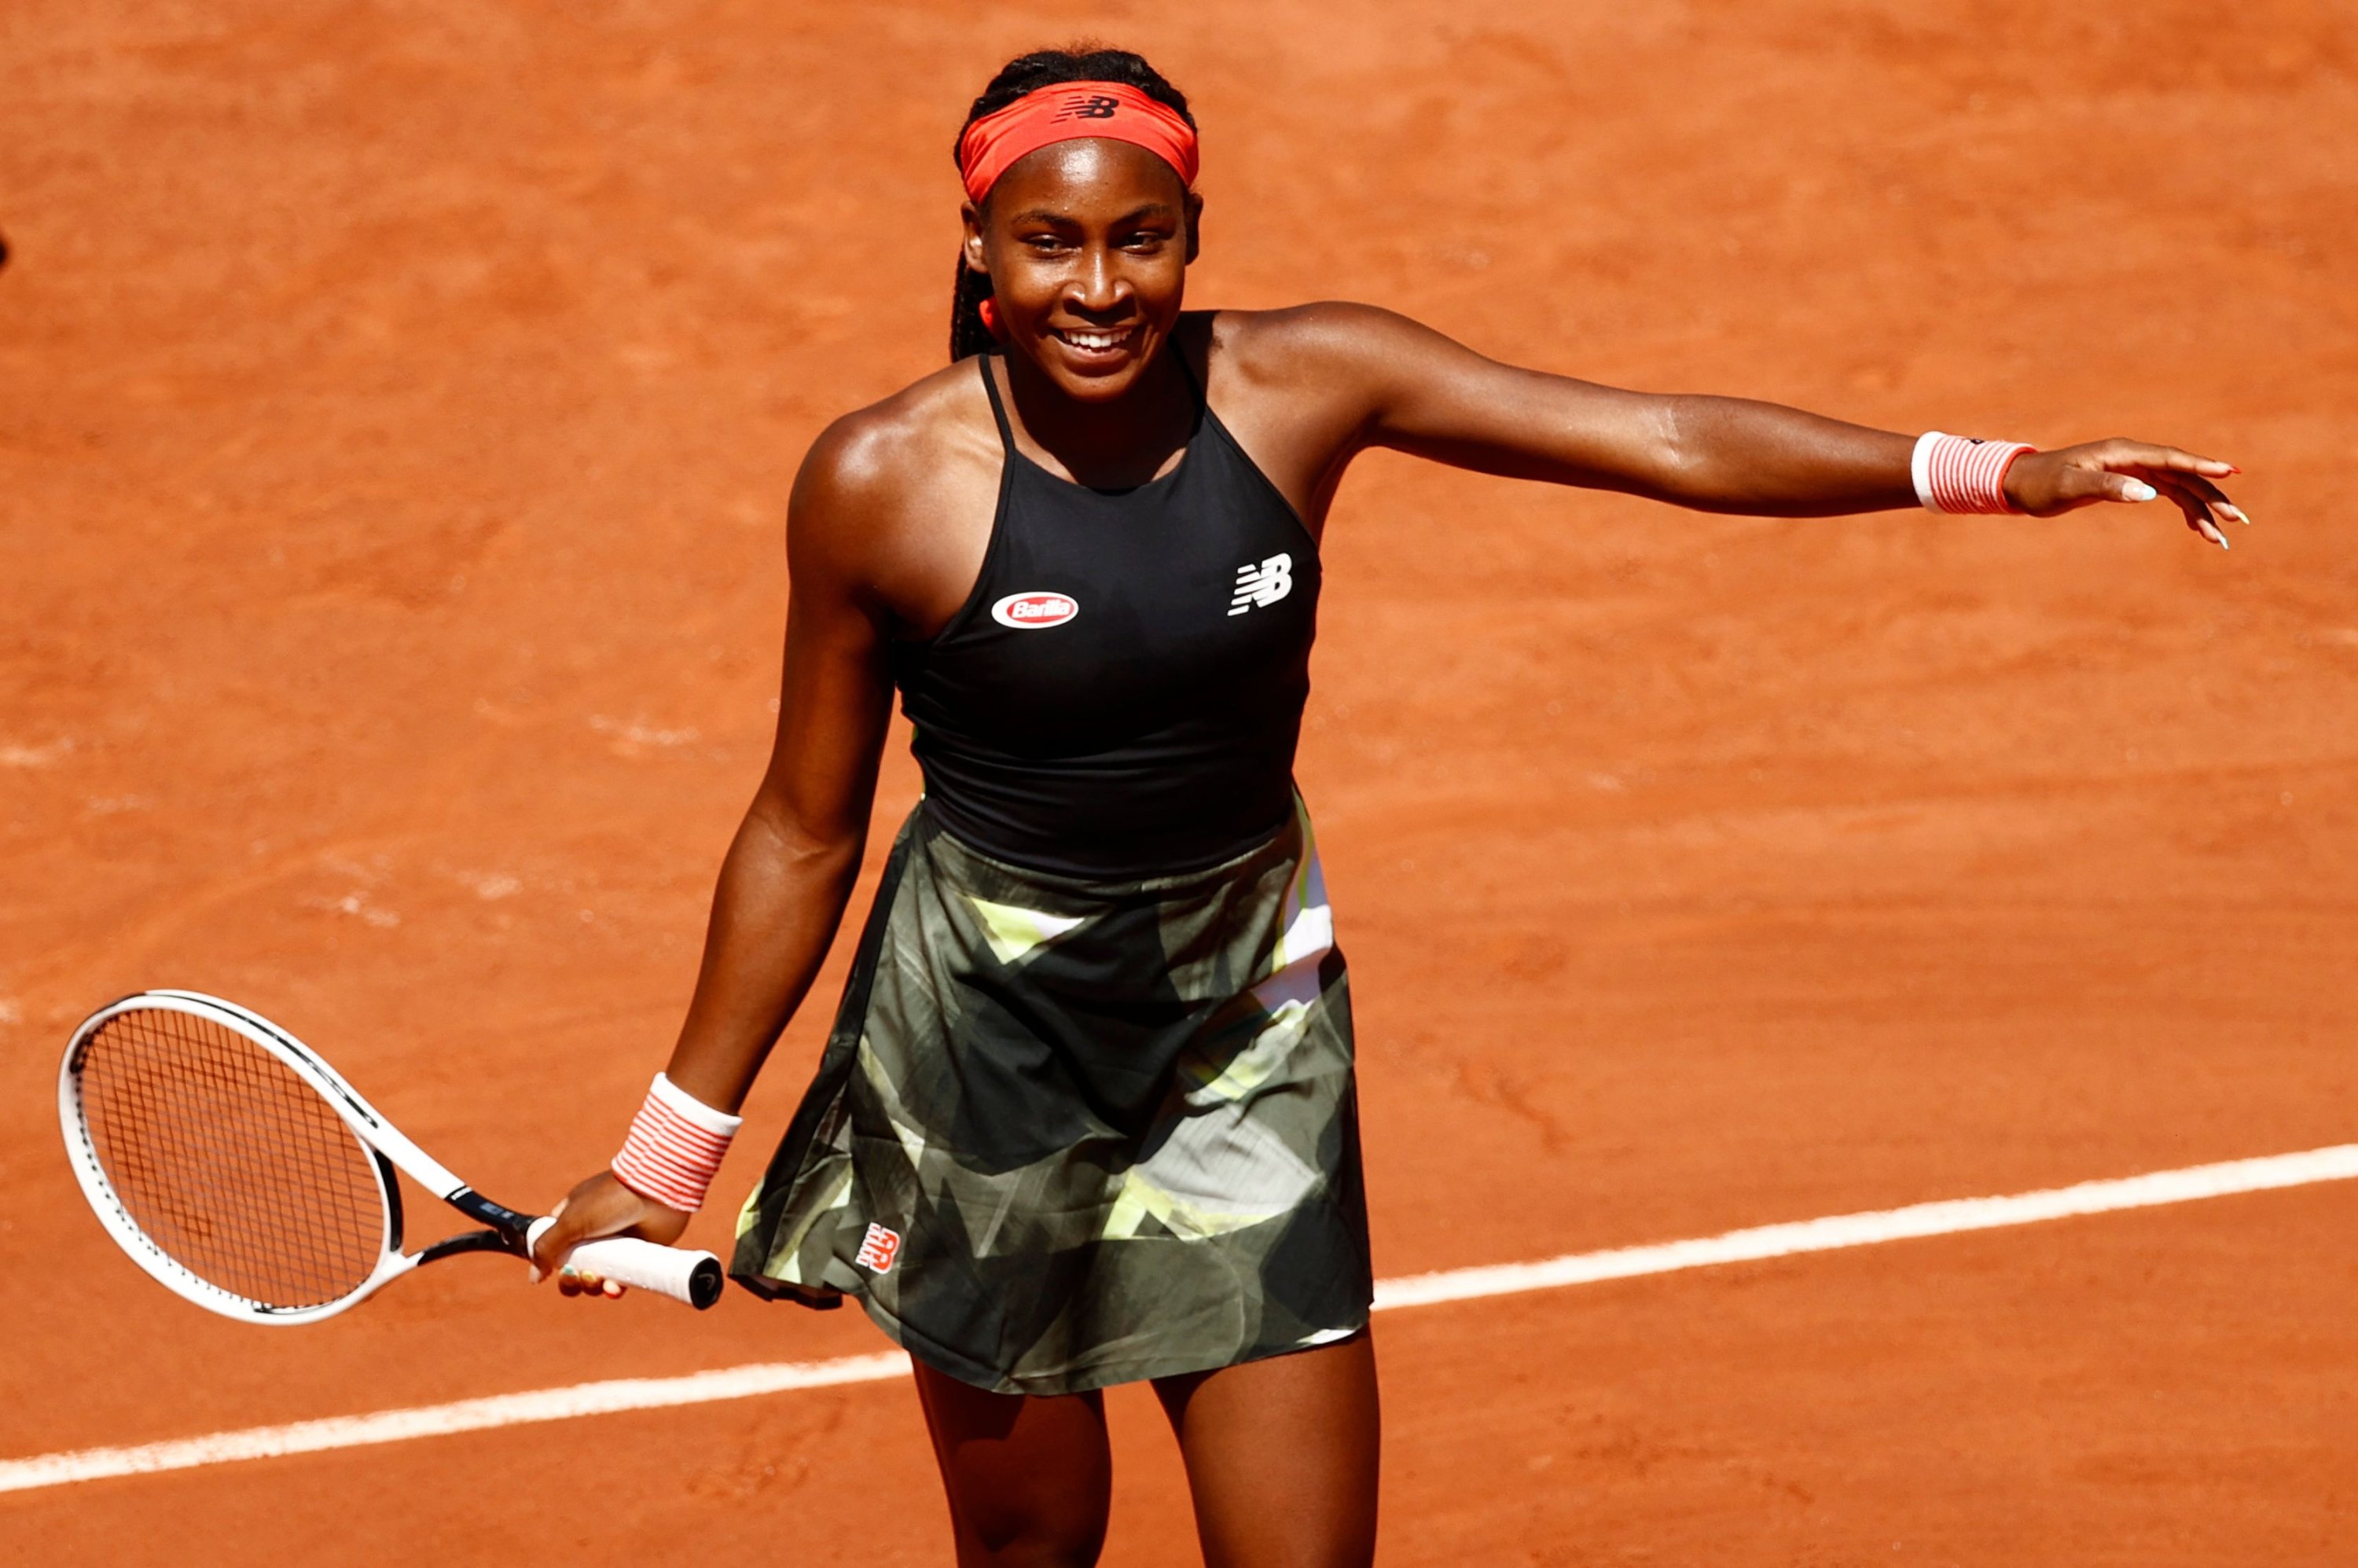 Coco Gauff becomes youngest Grand Slam quarterfinalist in 15 years | Daily Sabah